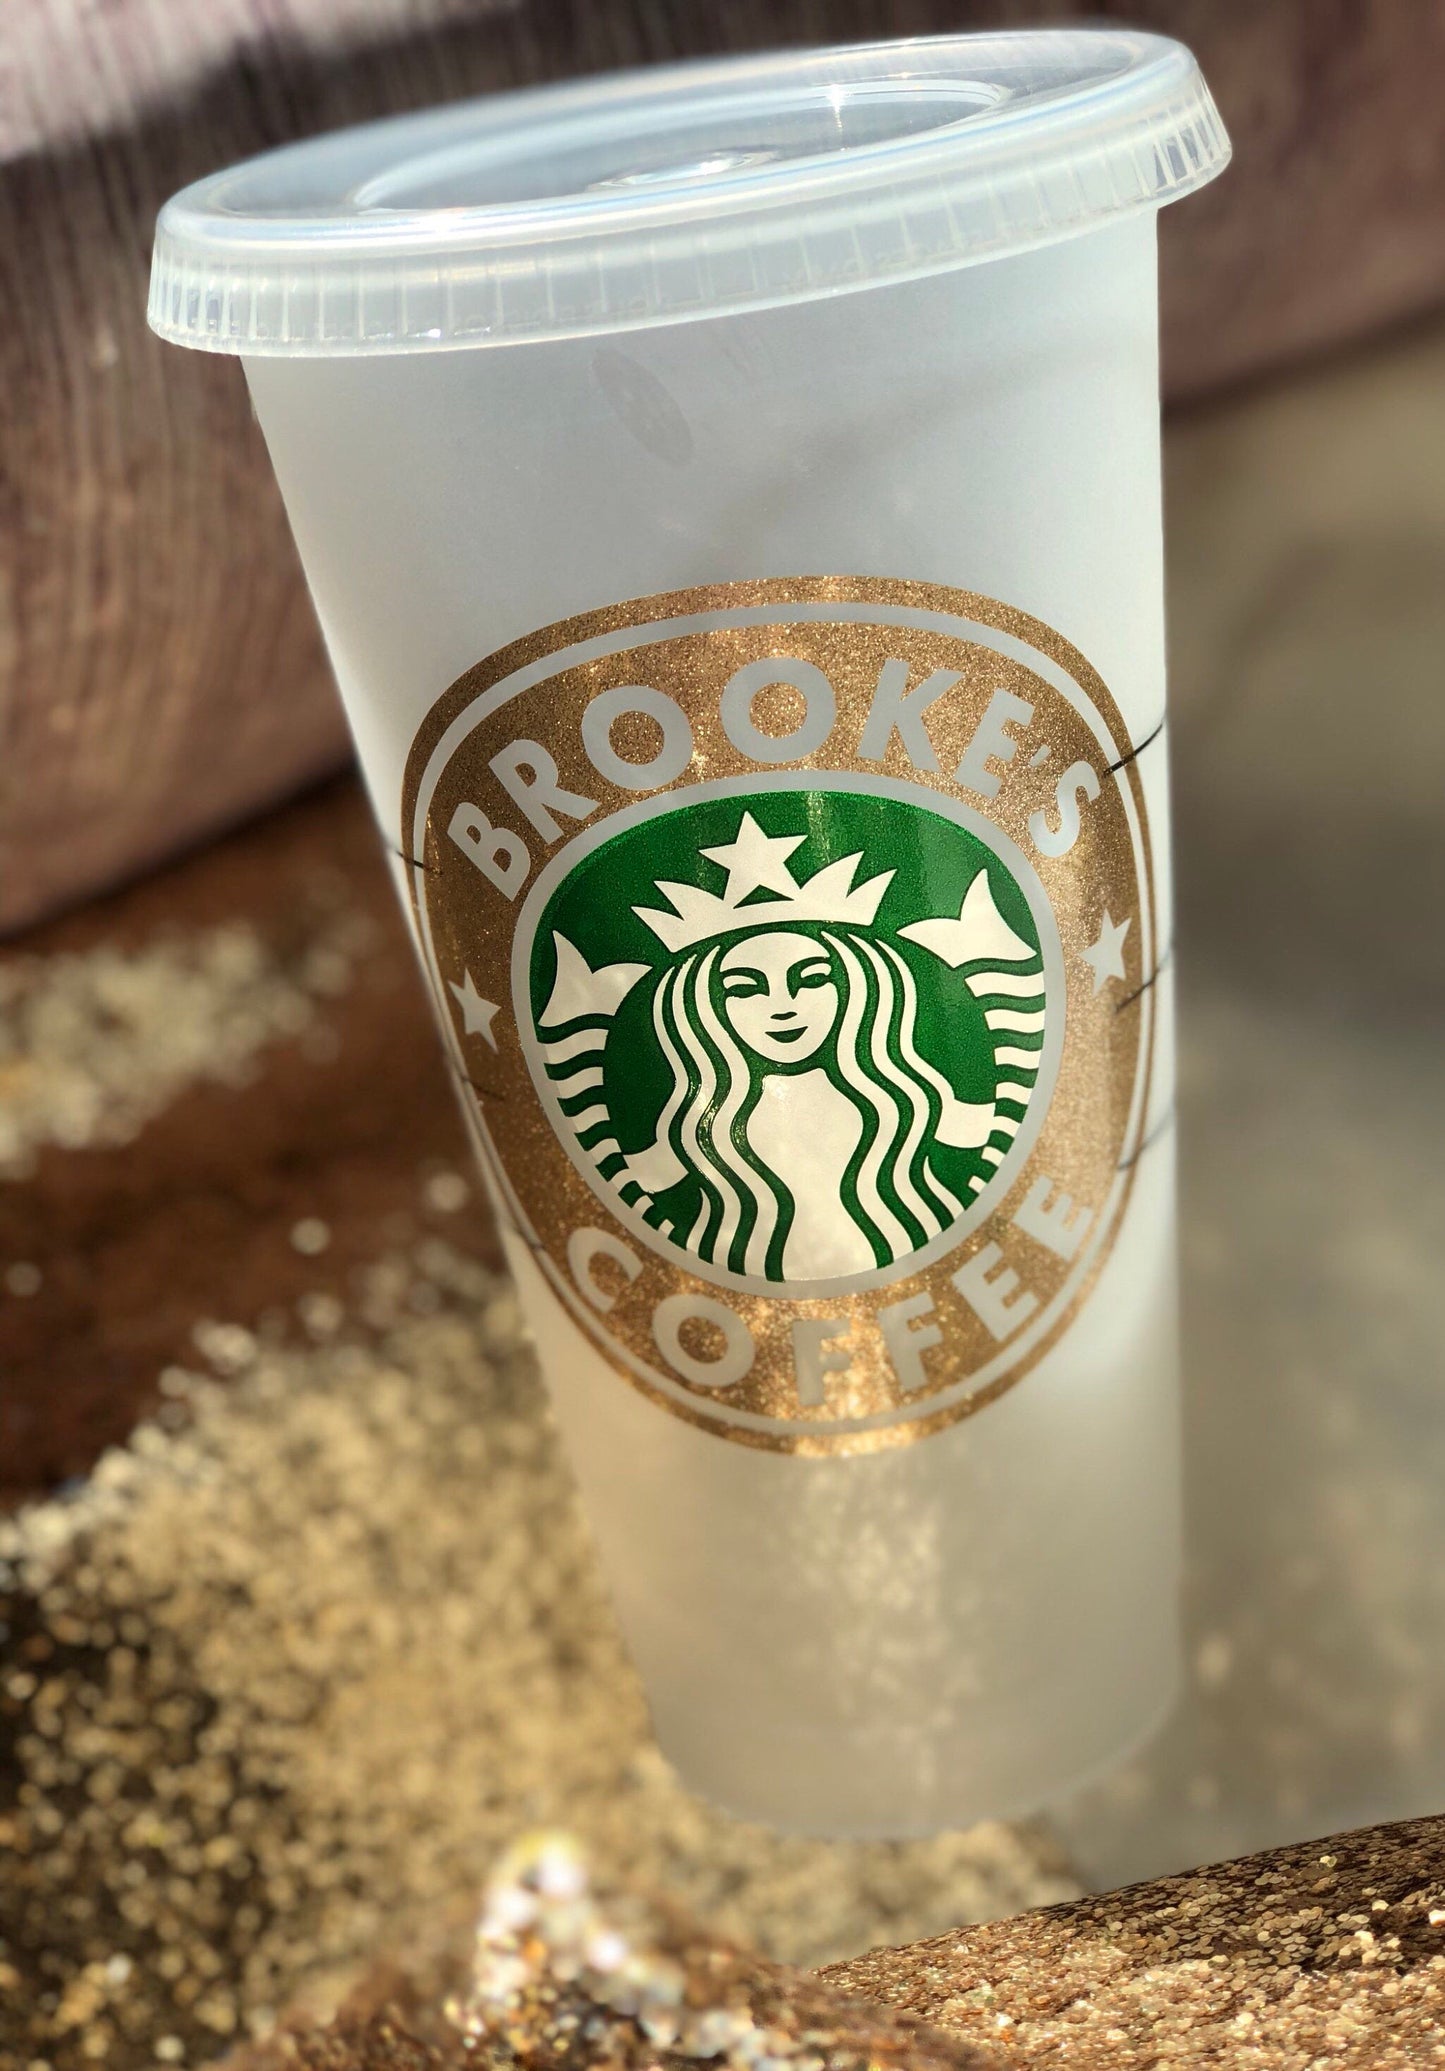 Starbucks cup, cold starbucks cup, personalized starbucks cup, venti cup, teacher gift, gift for her, glitter cup, reusable, bpa free